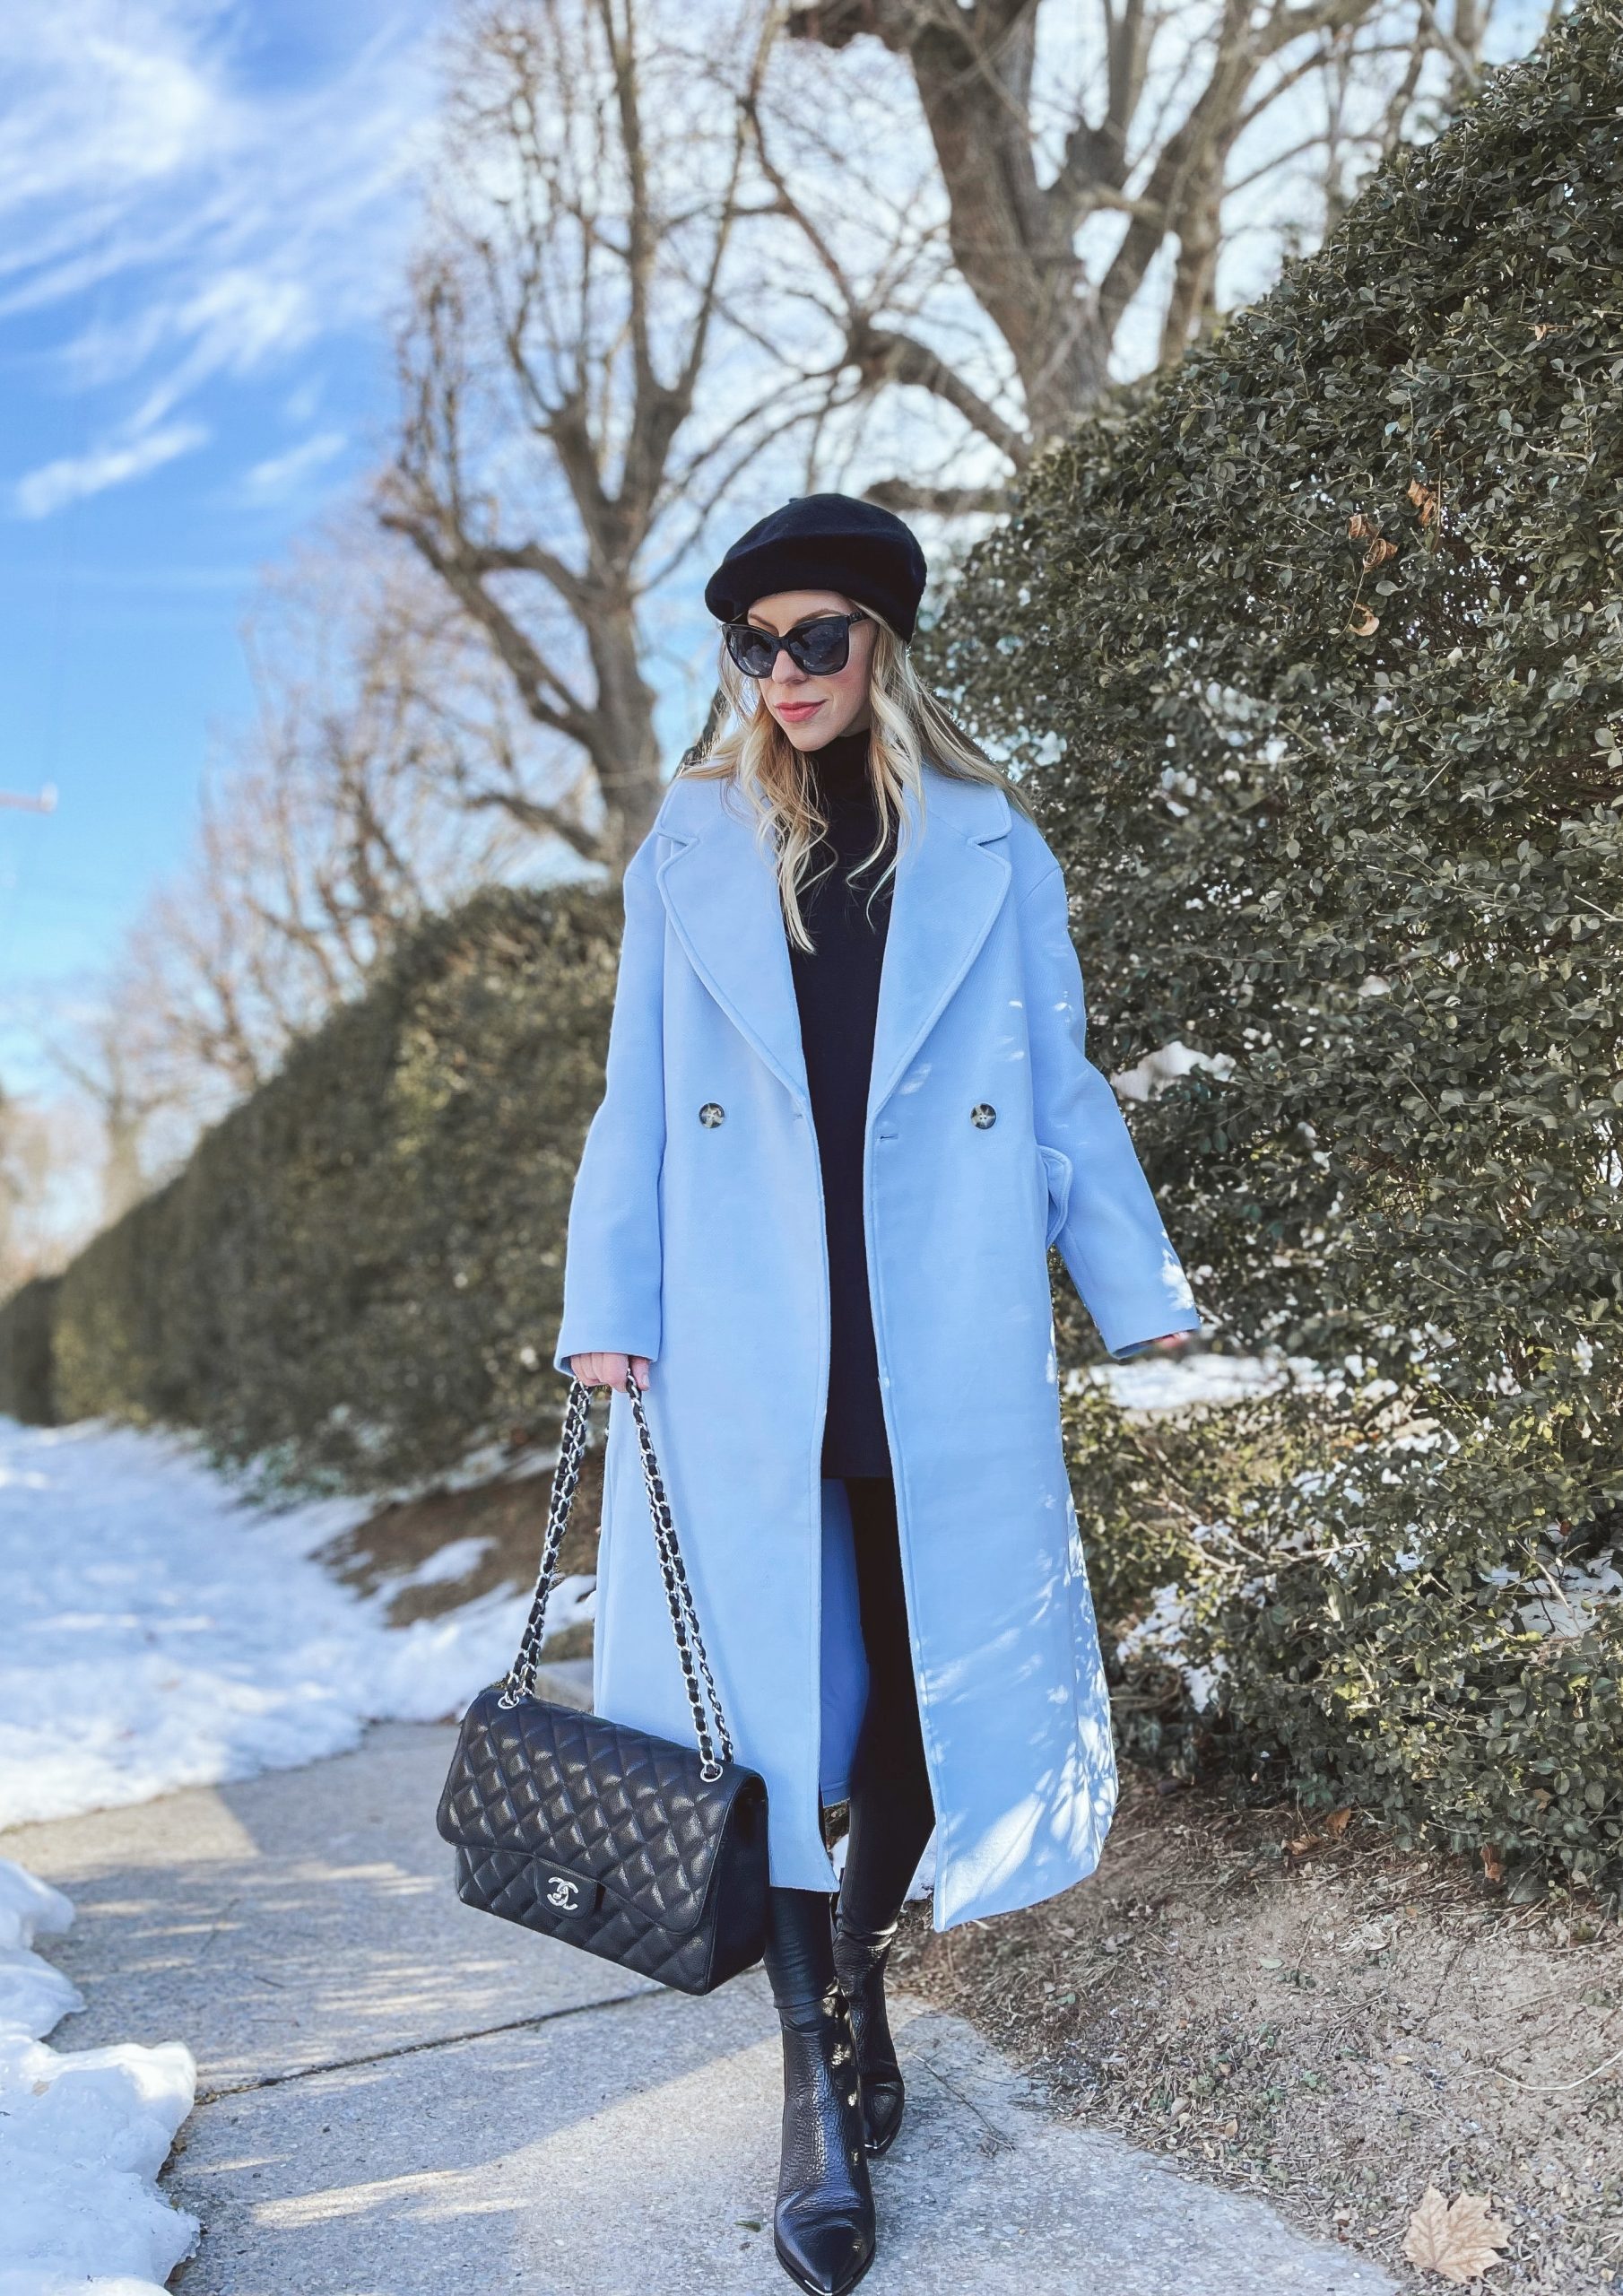 Look Chic in a Baby Blue Coat and a Clutch